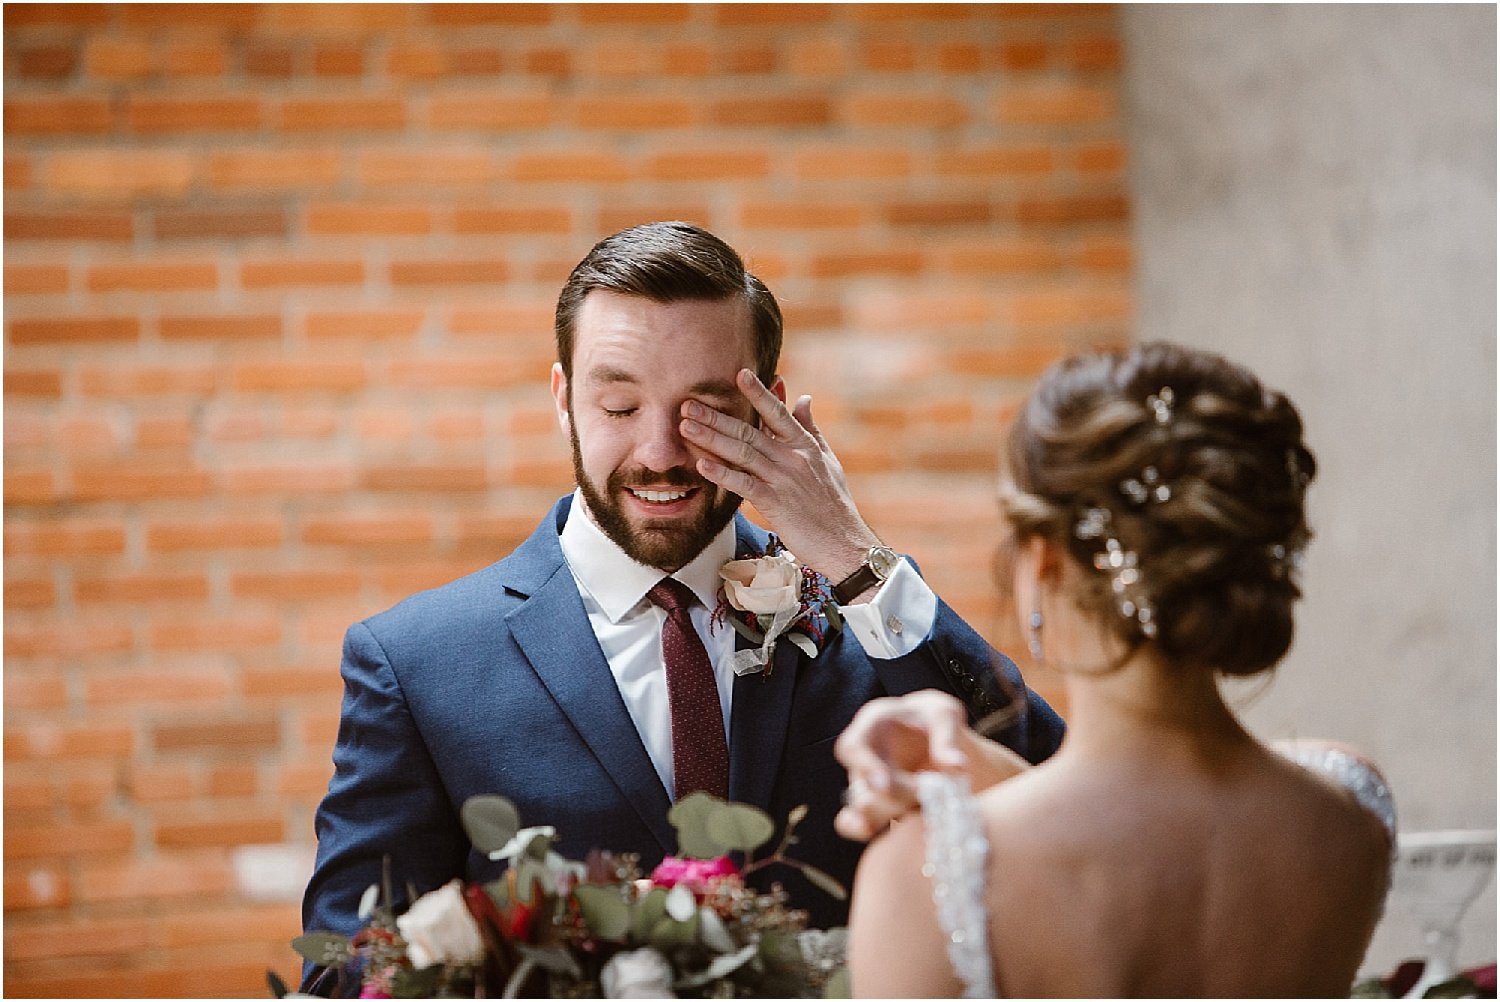 Emotional Groom after First Look Photos